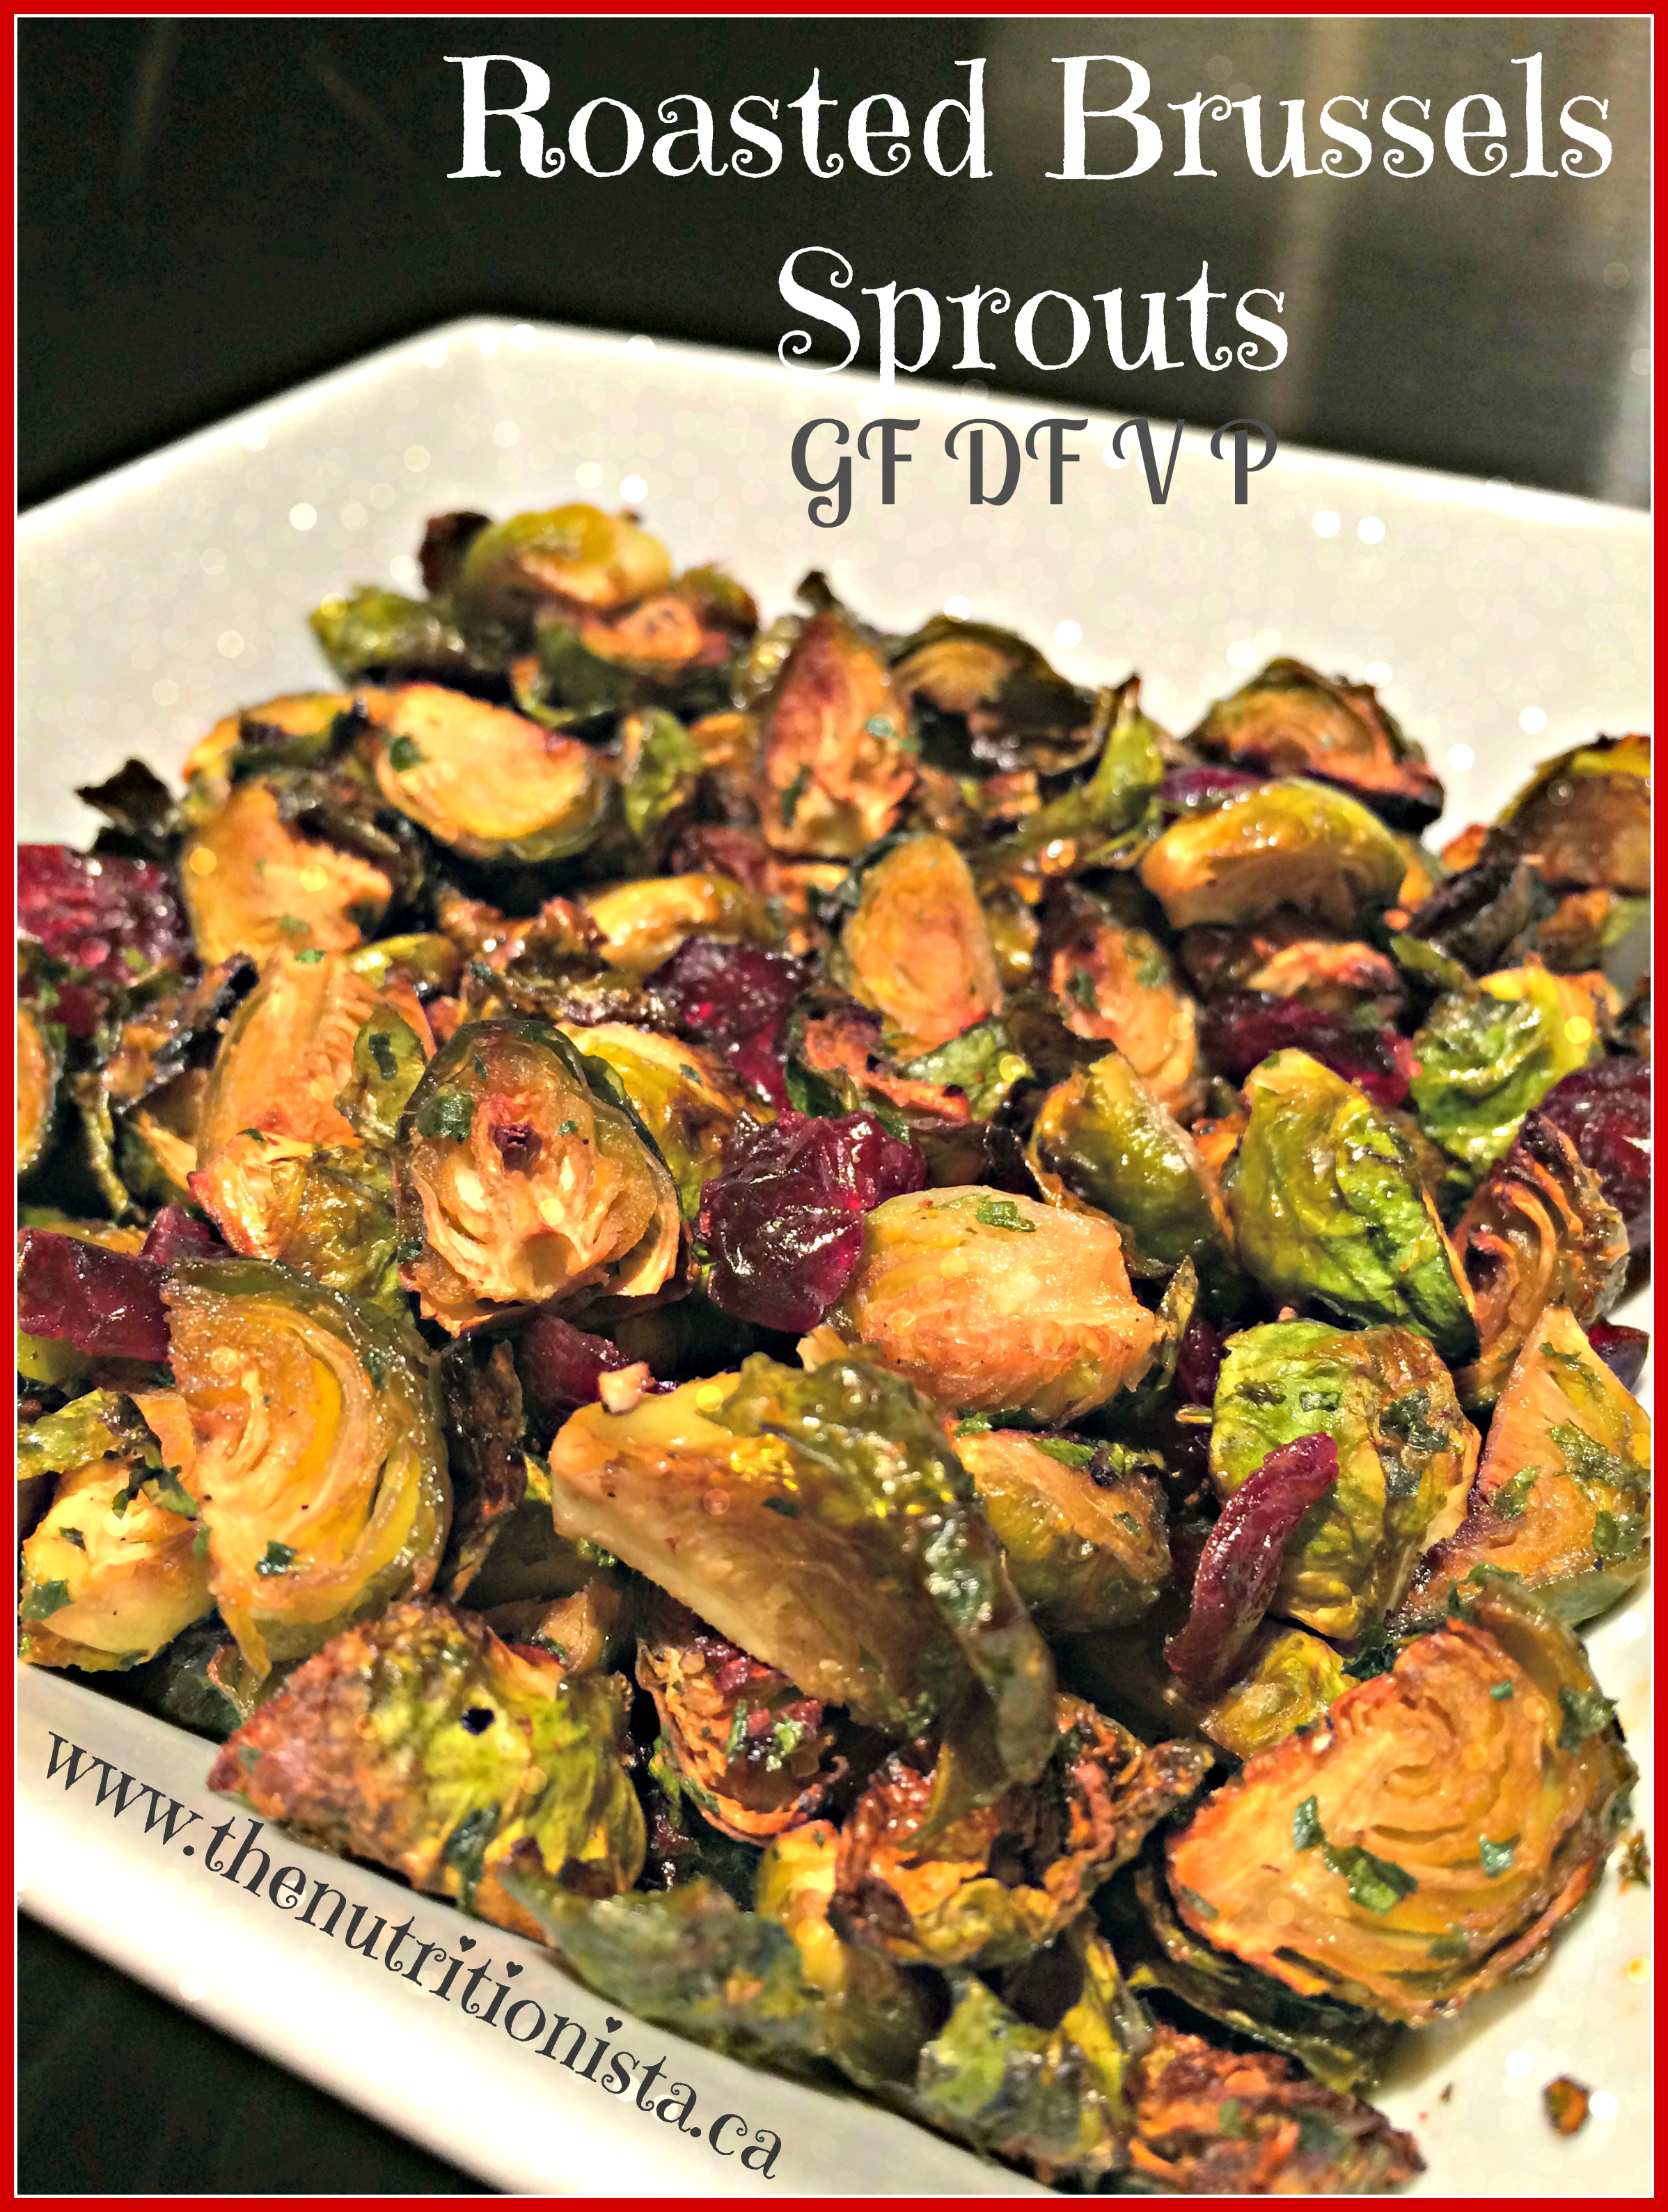 Roasted Brussels sprouts that even you kids will eat, I kid you not. Via @bcnutritionista